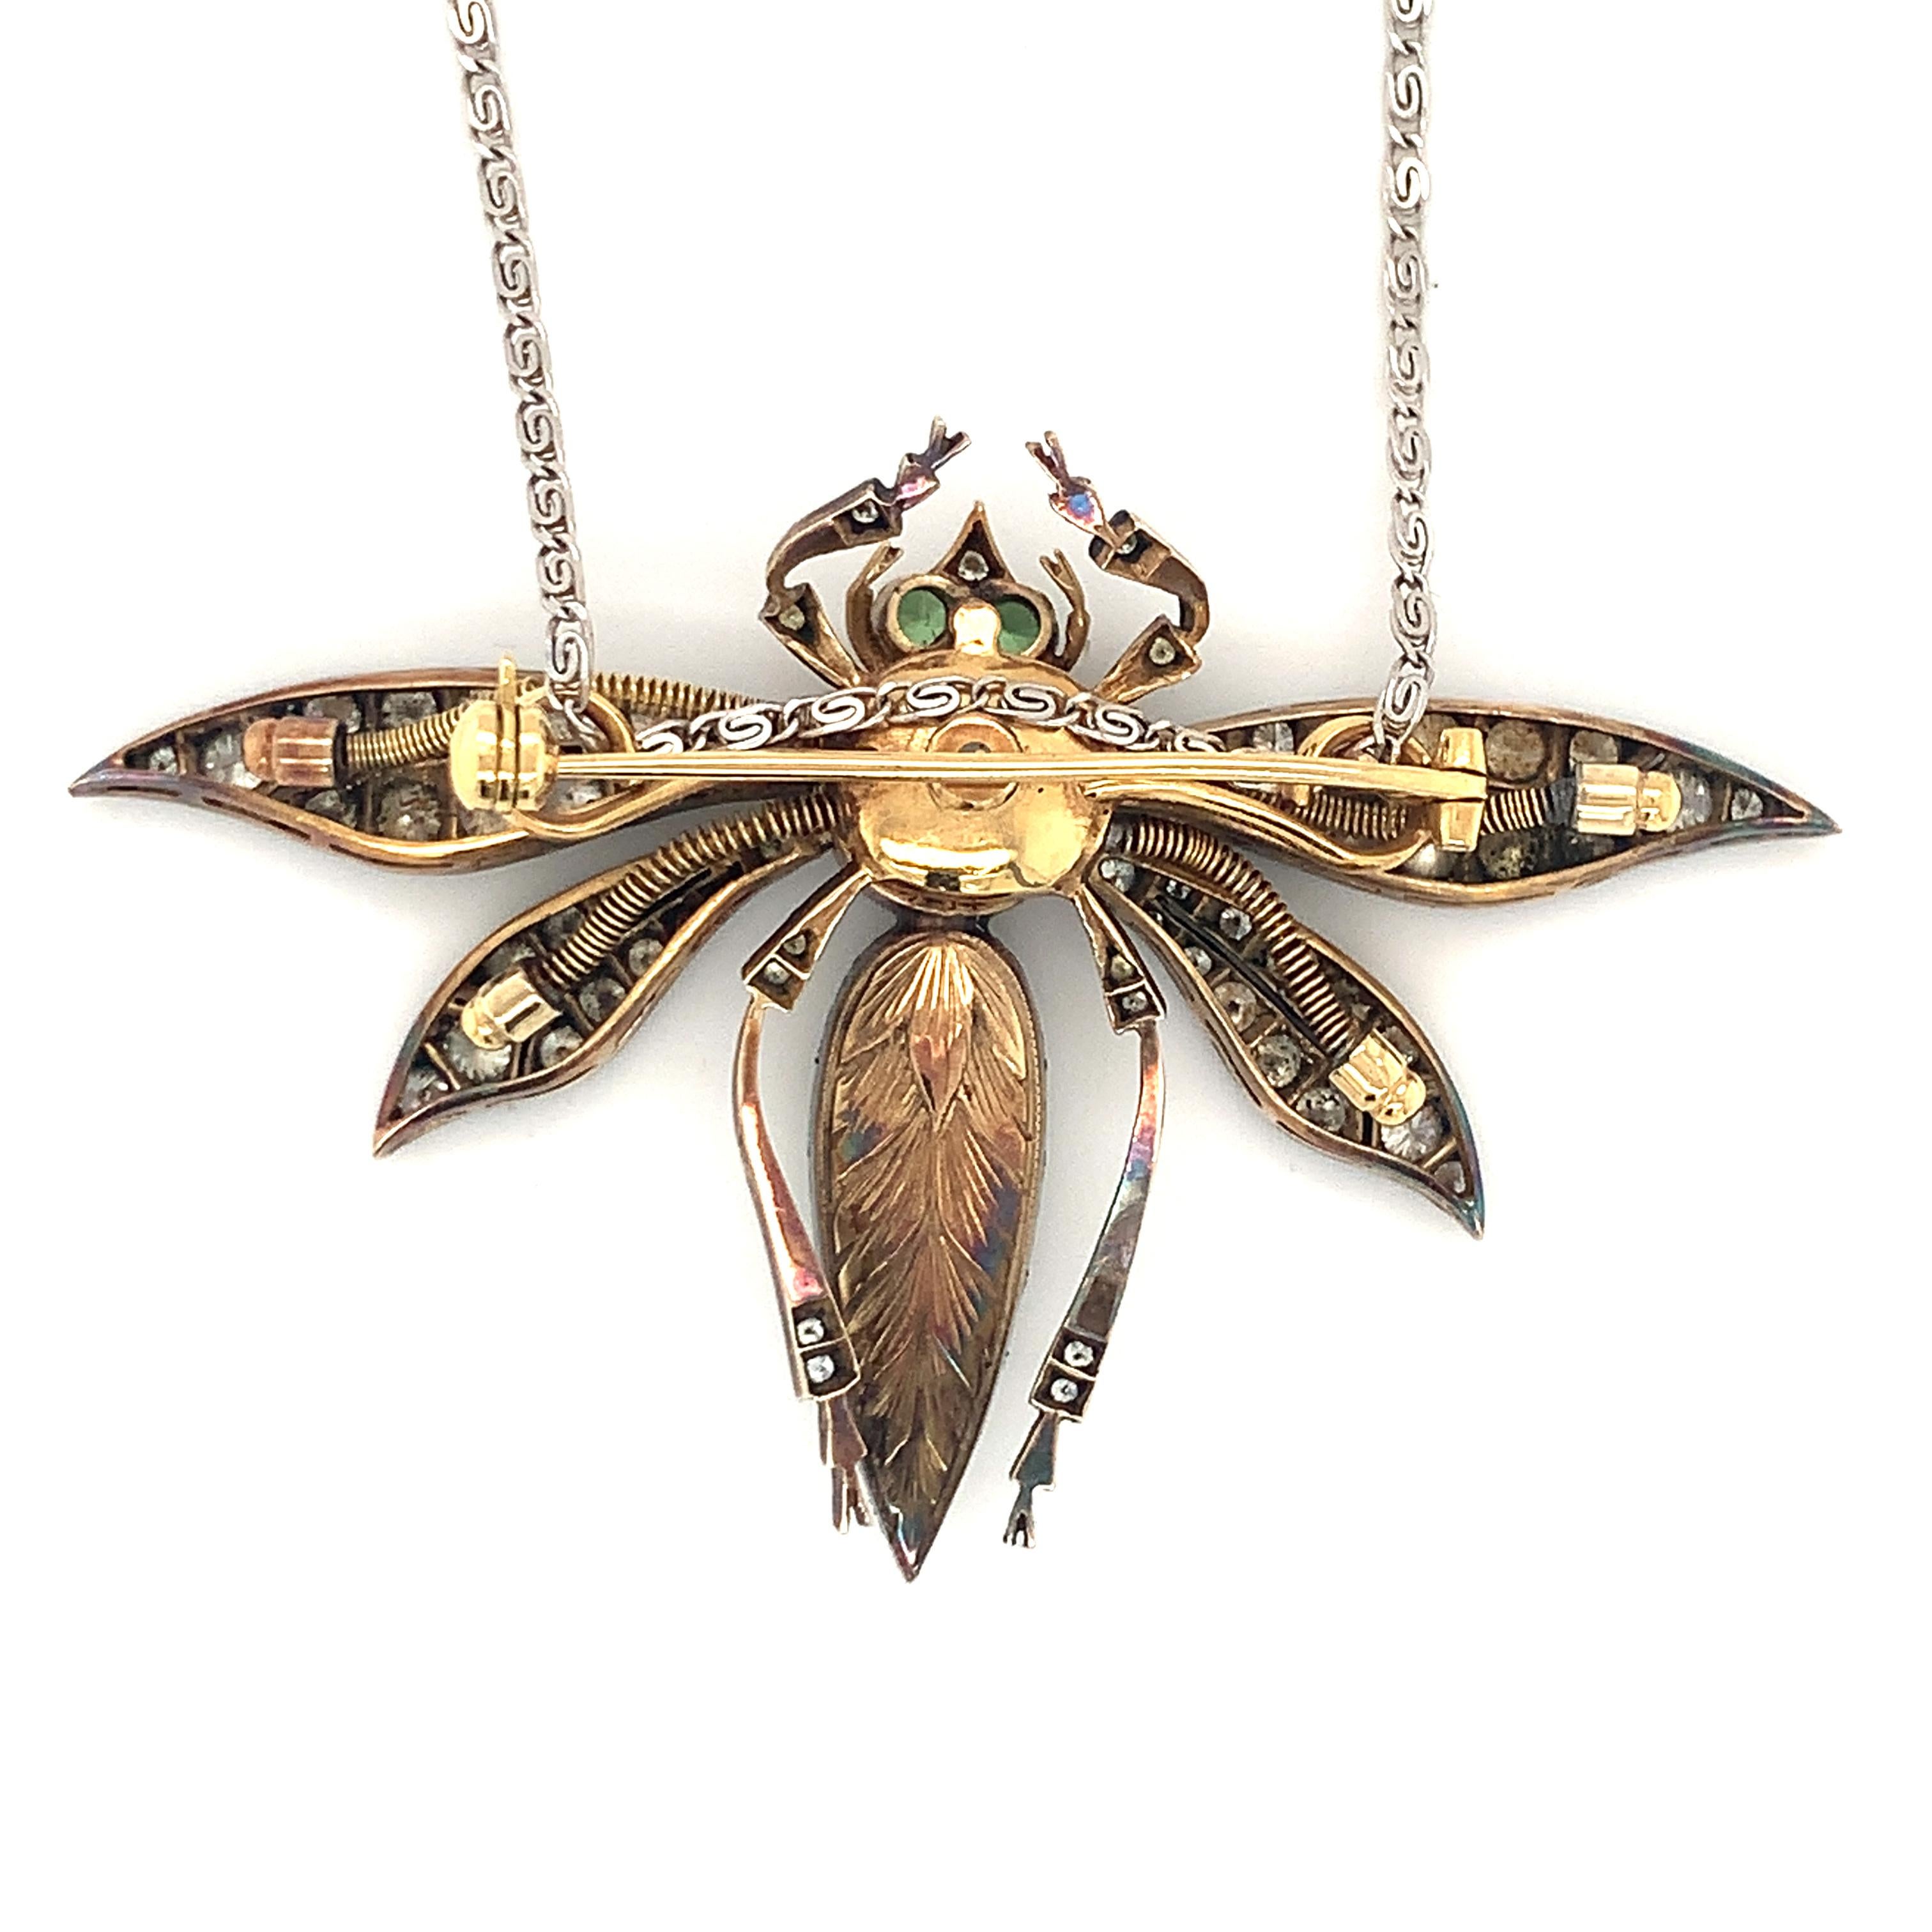 One gem-set dragonfly motif platinum and 18K yellow gold pendant / brooch featuring one bezel set, square cushion cut pink sapphire weighing 2 ct. and two bezel set, round brilliant cut green garnet eyes totaling 0.20 ct. The piece is enhanced by 75